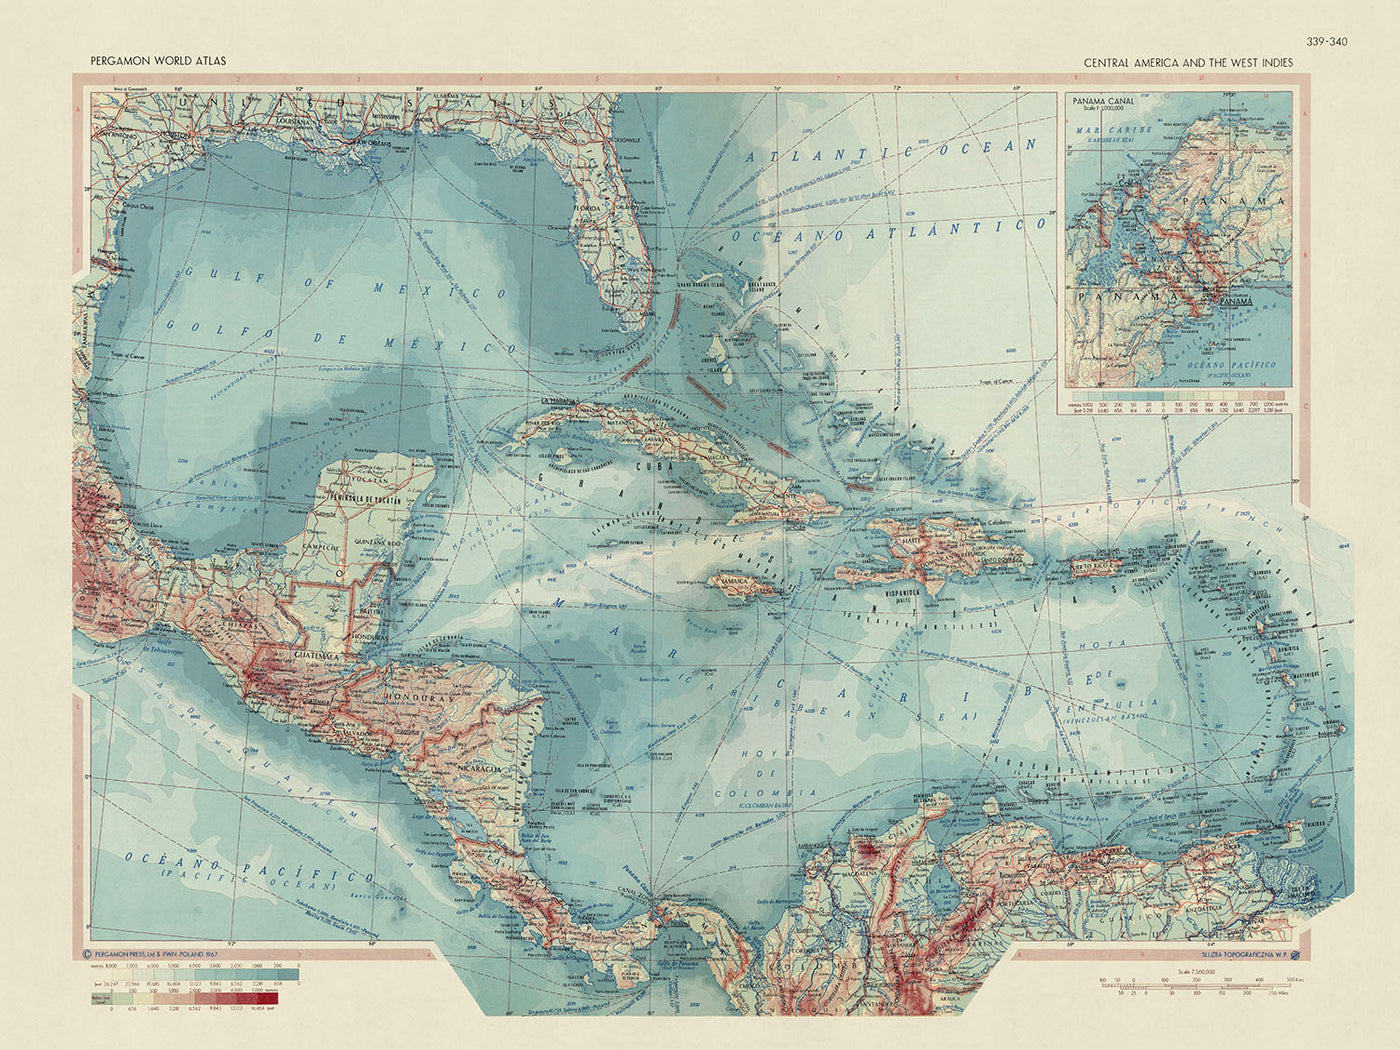 Old Map of Central America and the West Indies, 1967: Panama Canal, Florida Peninsula, Caribbean Sea & Islands